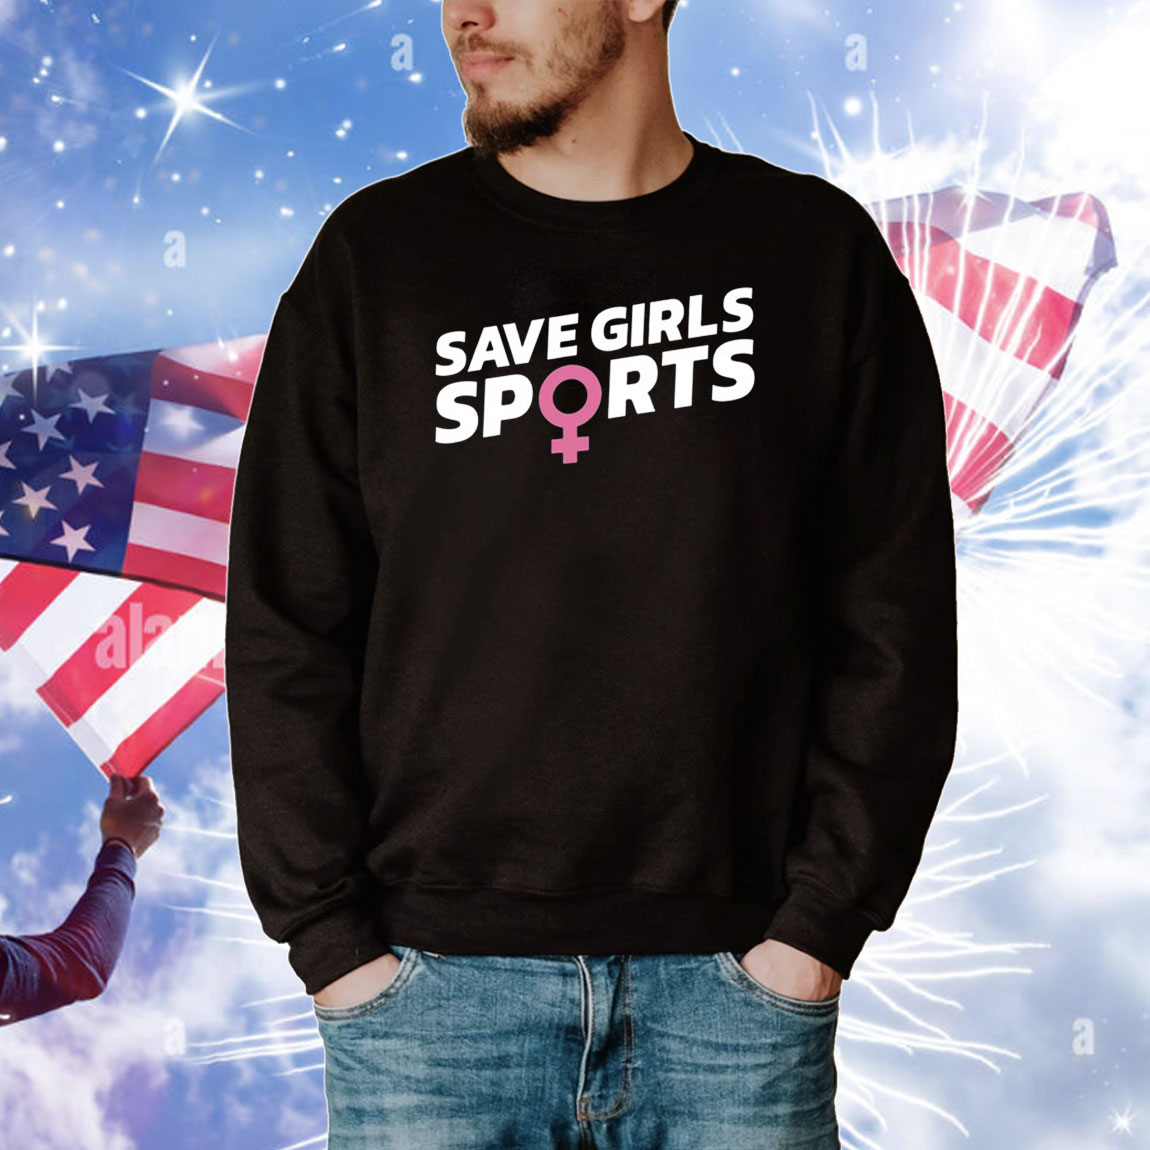 Gays Against Groomers Save Girls Sports Tee Shirts